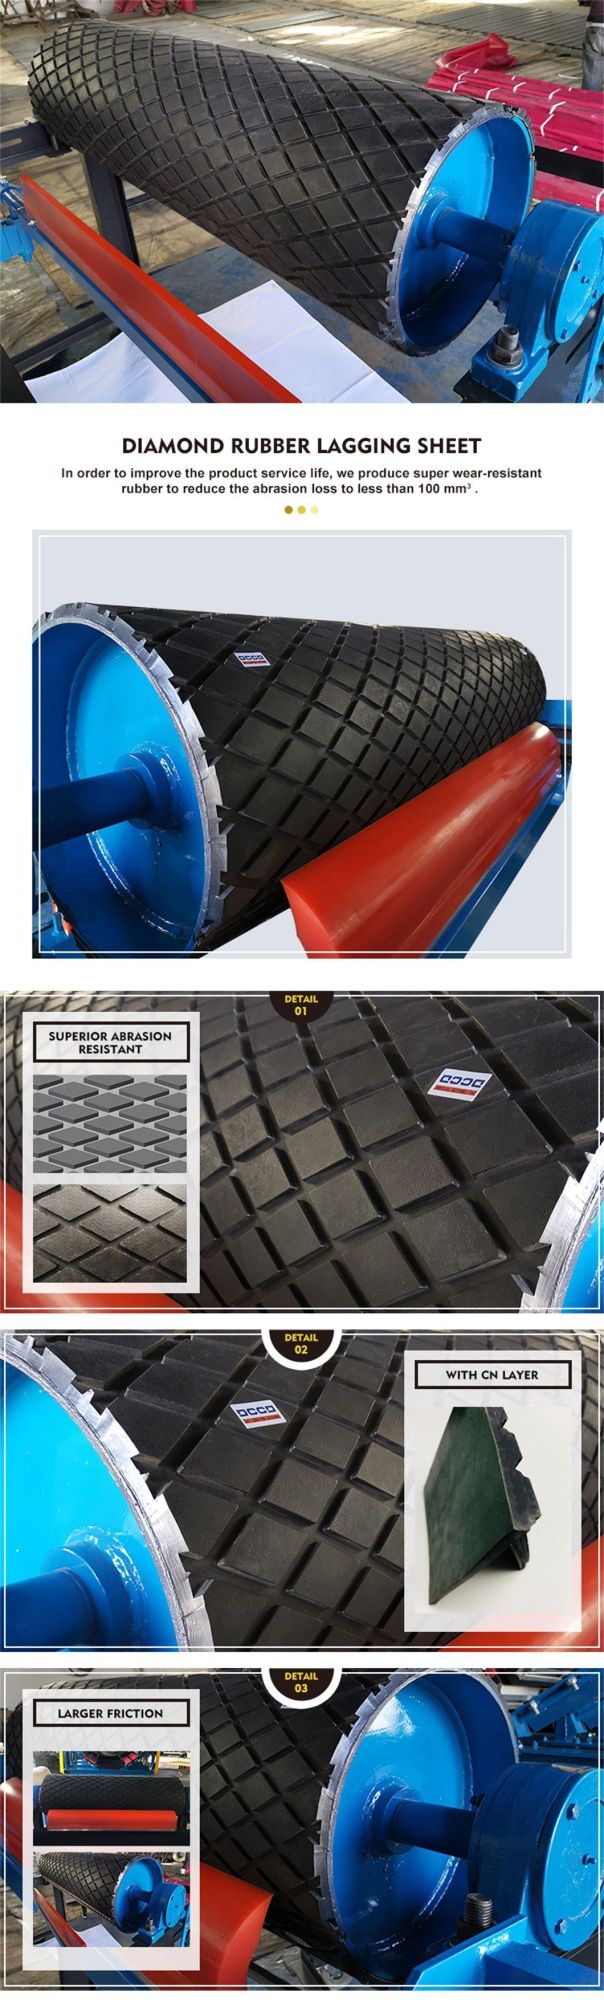 High Wear Resistant Cn Layer Conveyor Rubber Pulley and Roller Lagging Diamond Rubber Lagging for Conveyor Drive